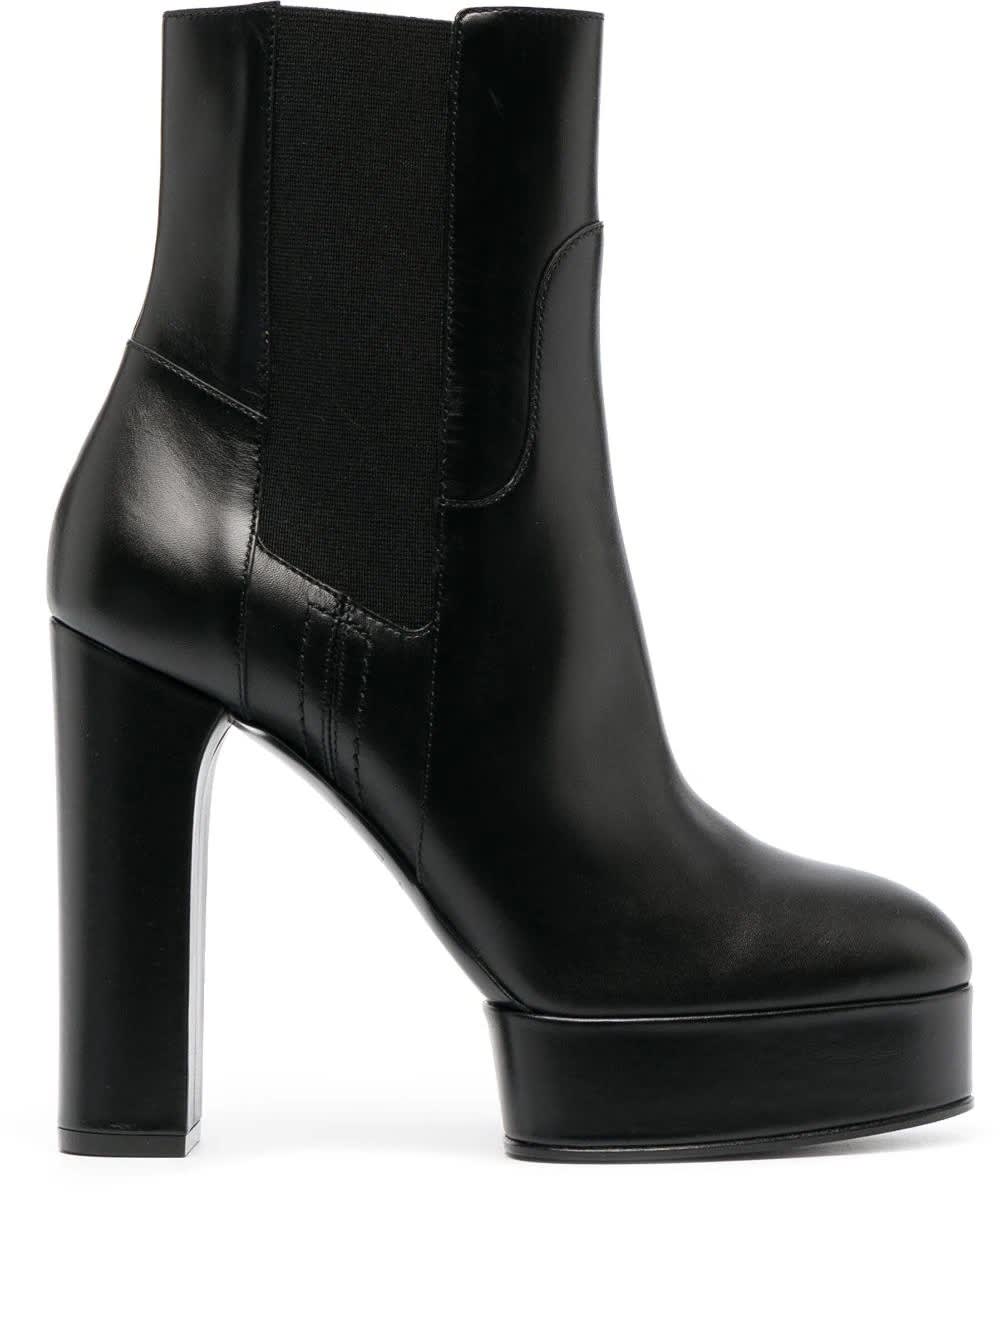 CASADEI BLACK BETTY LEATHER PLATFORM ANKLE BOOTS